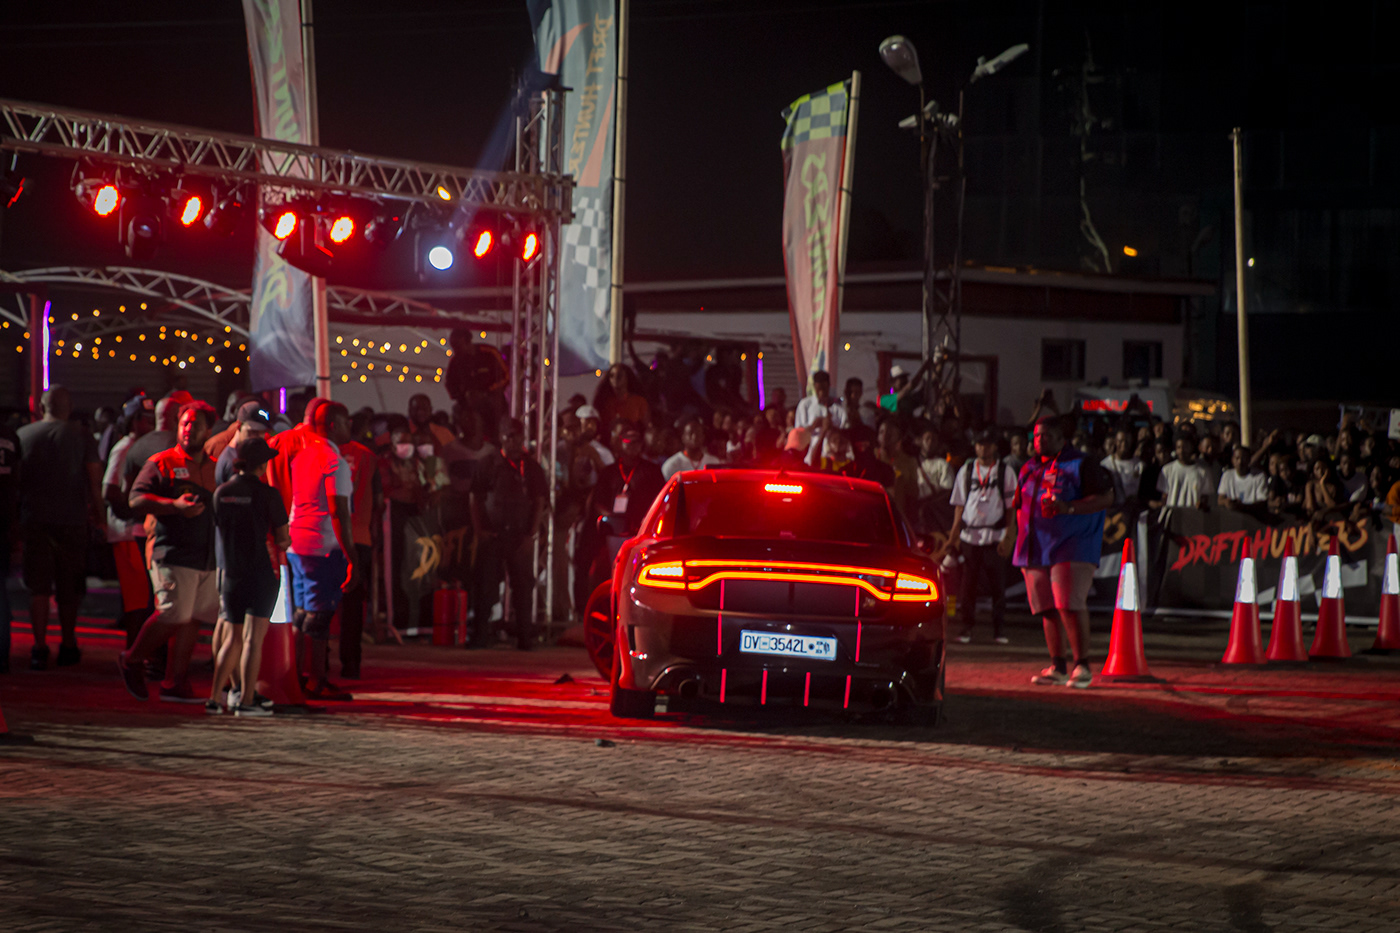 event photography photographer Events Cars automobile motorcycle photoshoot Canon Photography  drifting